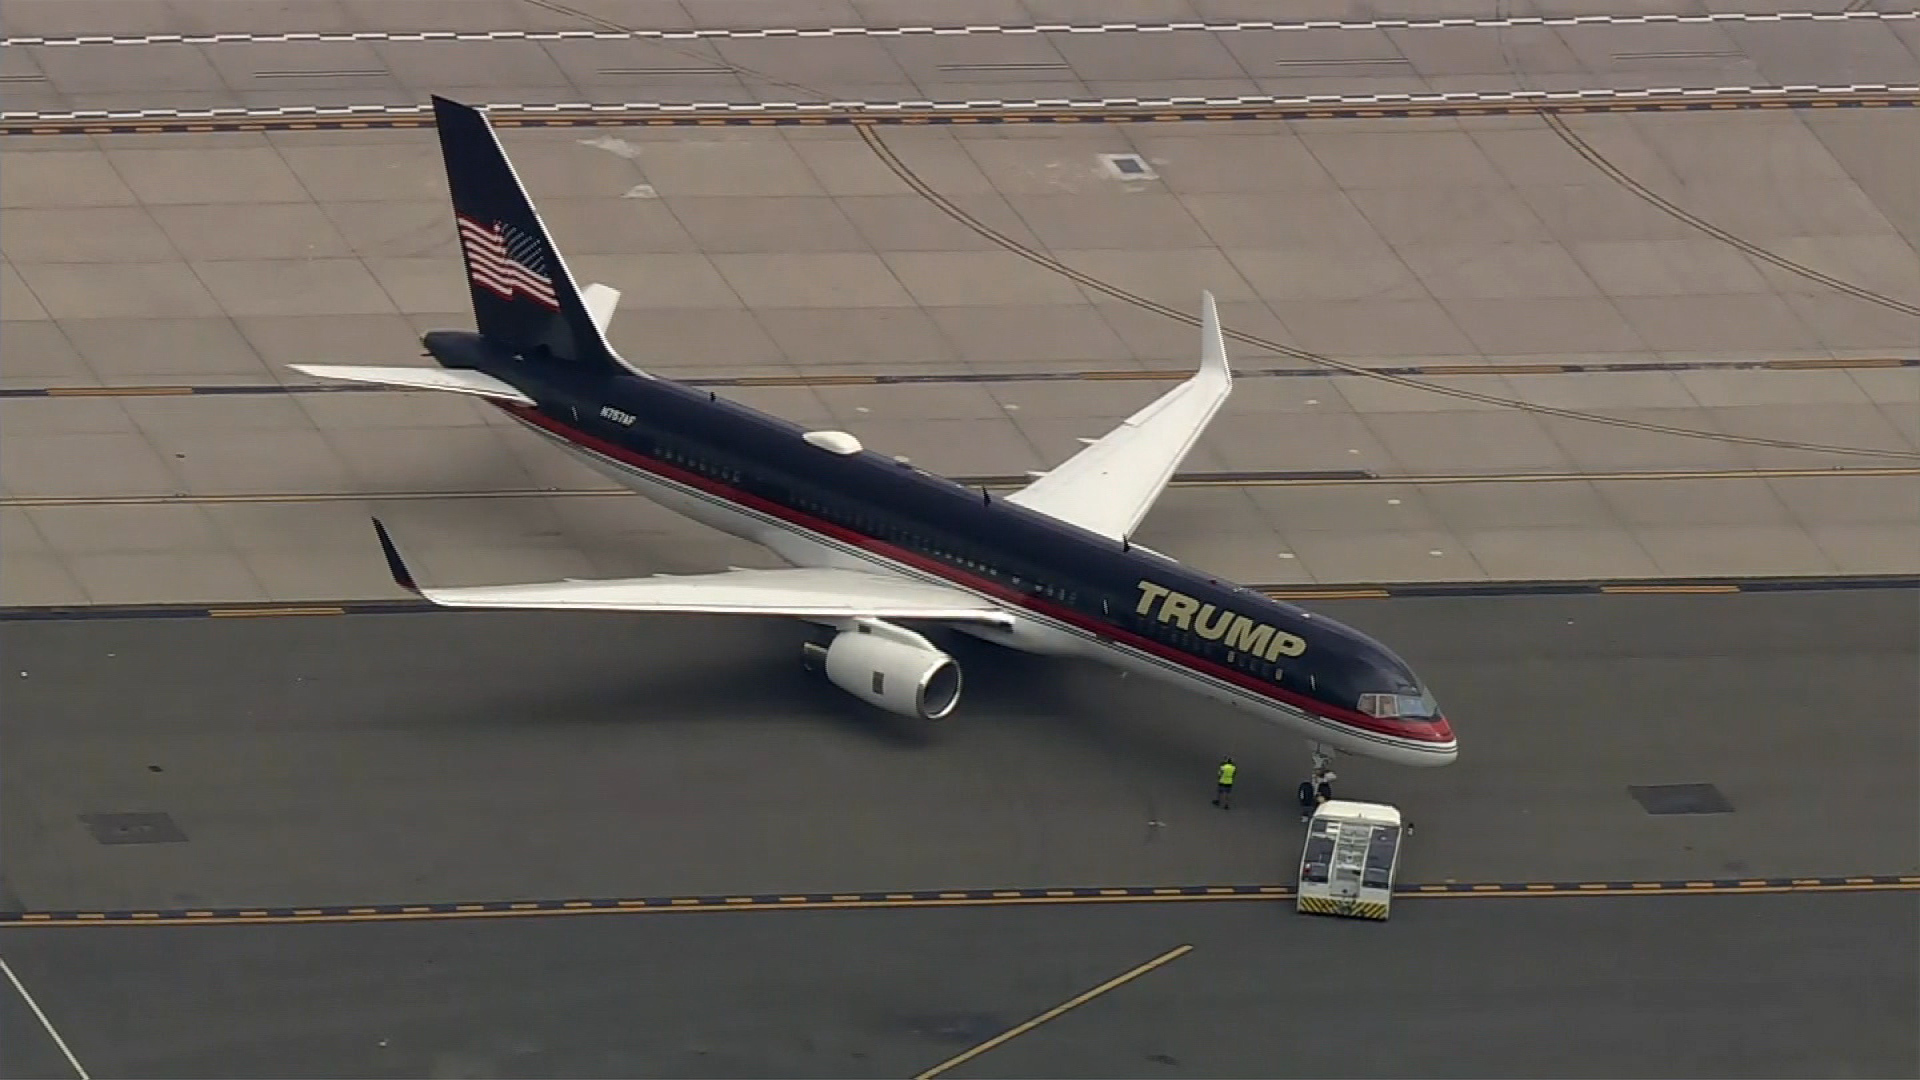 Former President Donald Trump's airplane taxis at Newark Liberty International Airport on Thursday.